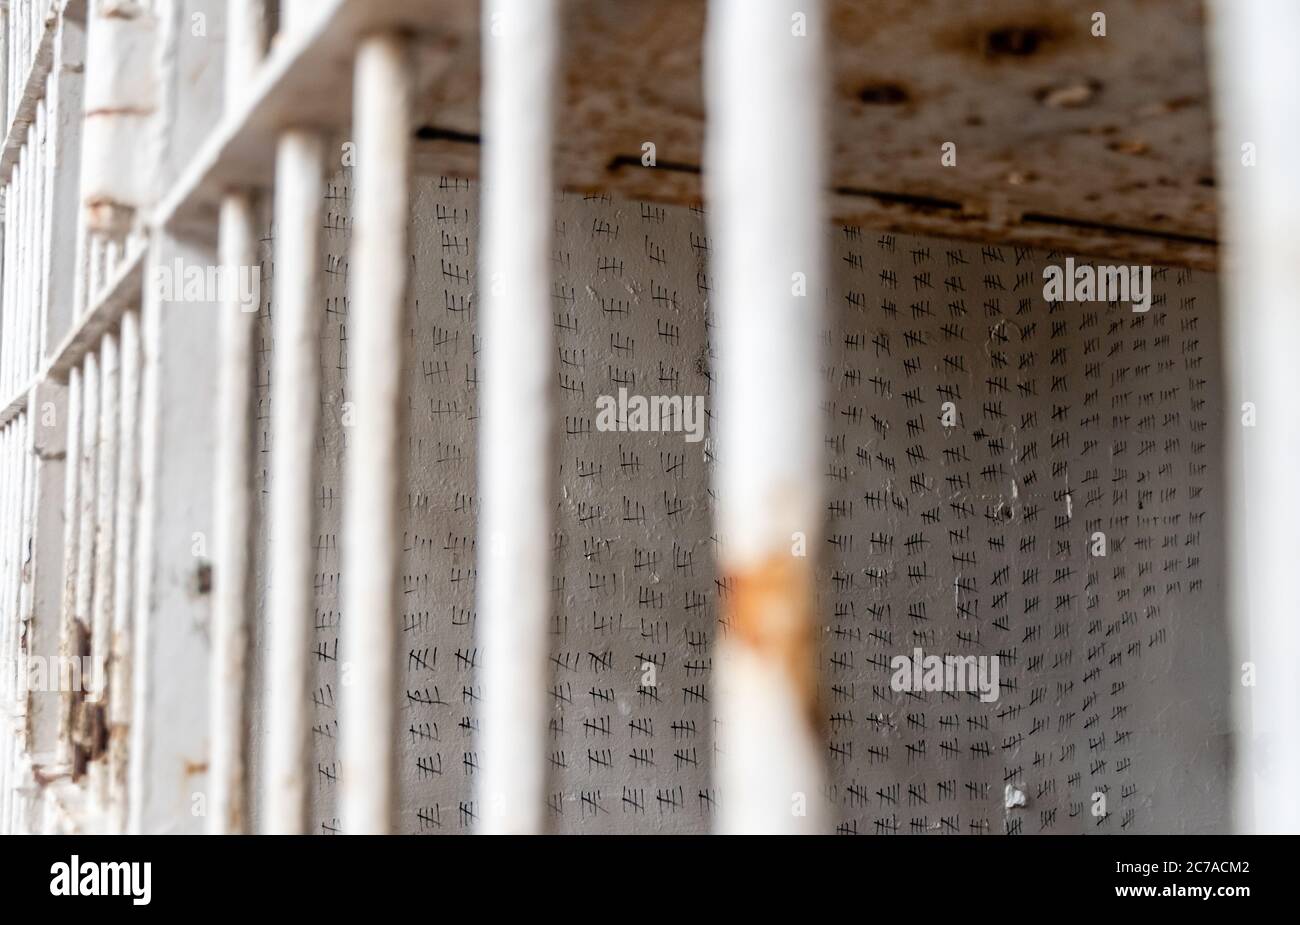 brushy mountain state penitentiary hash marks/strikes on wall of cell in Tennessee prison Stock Photo